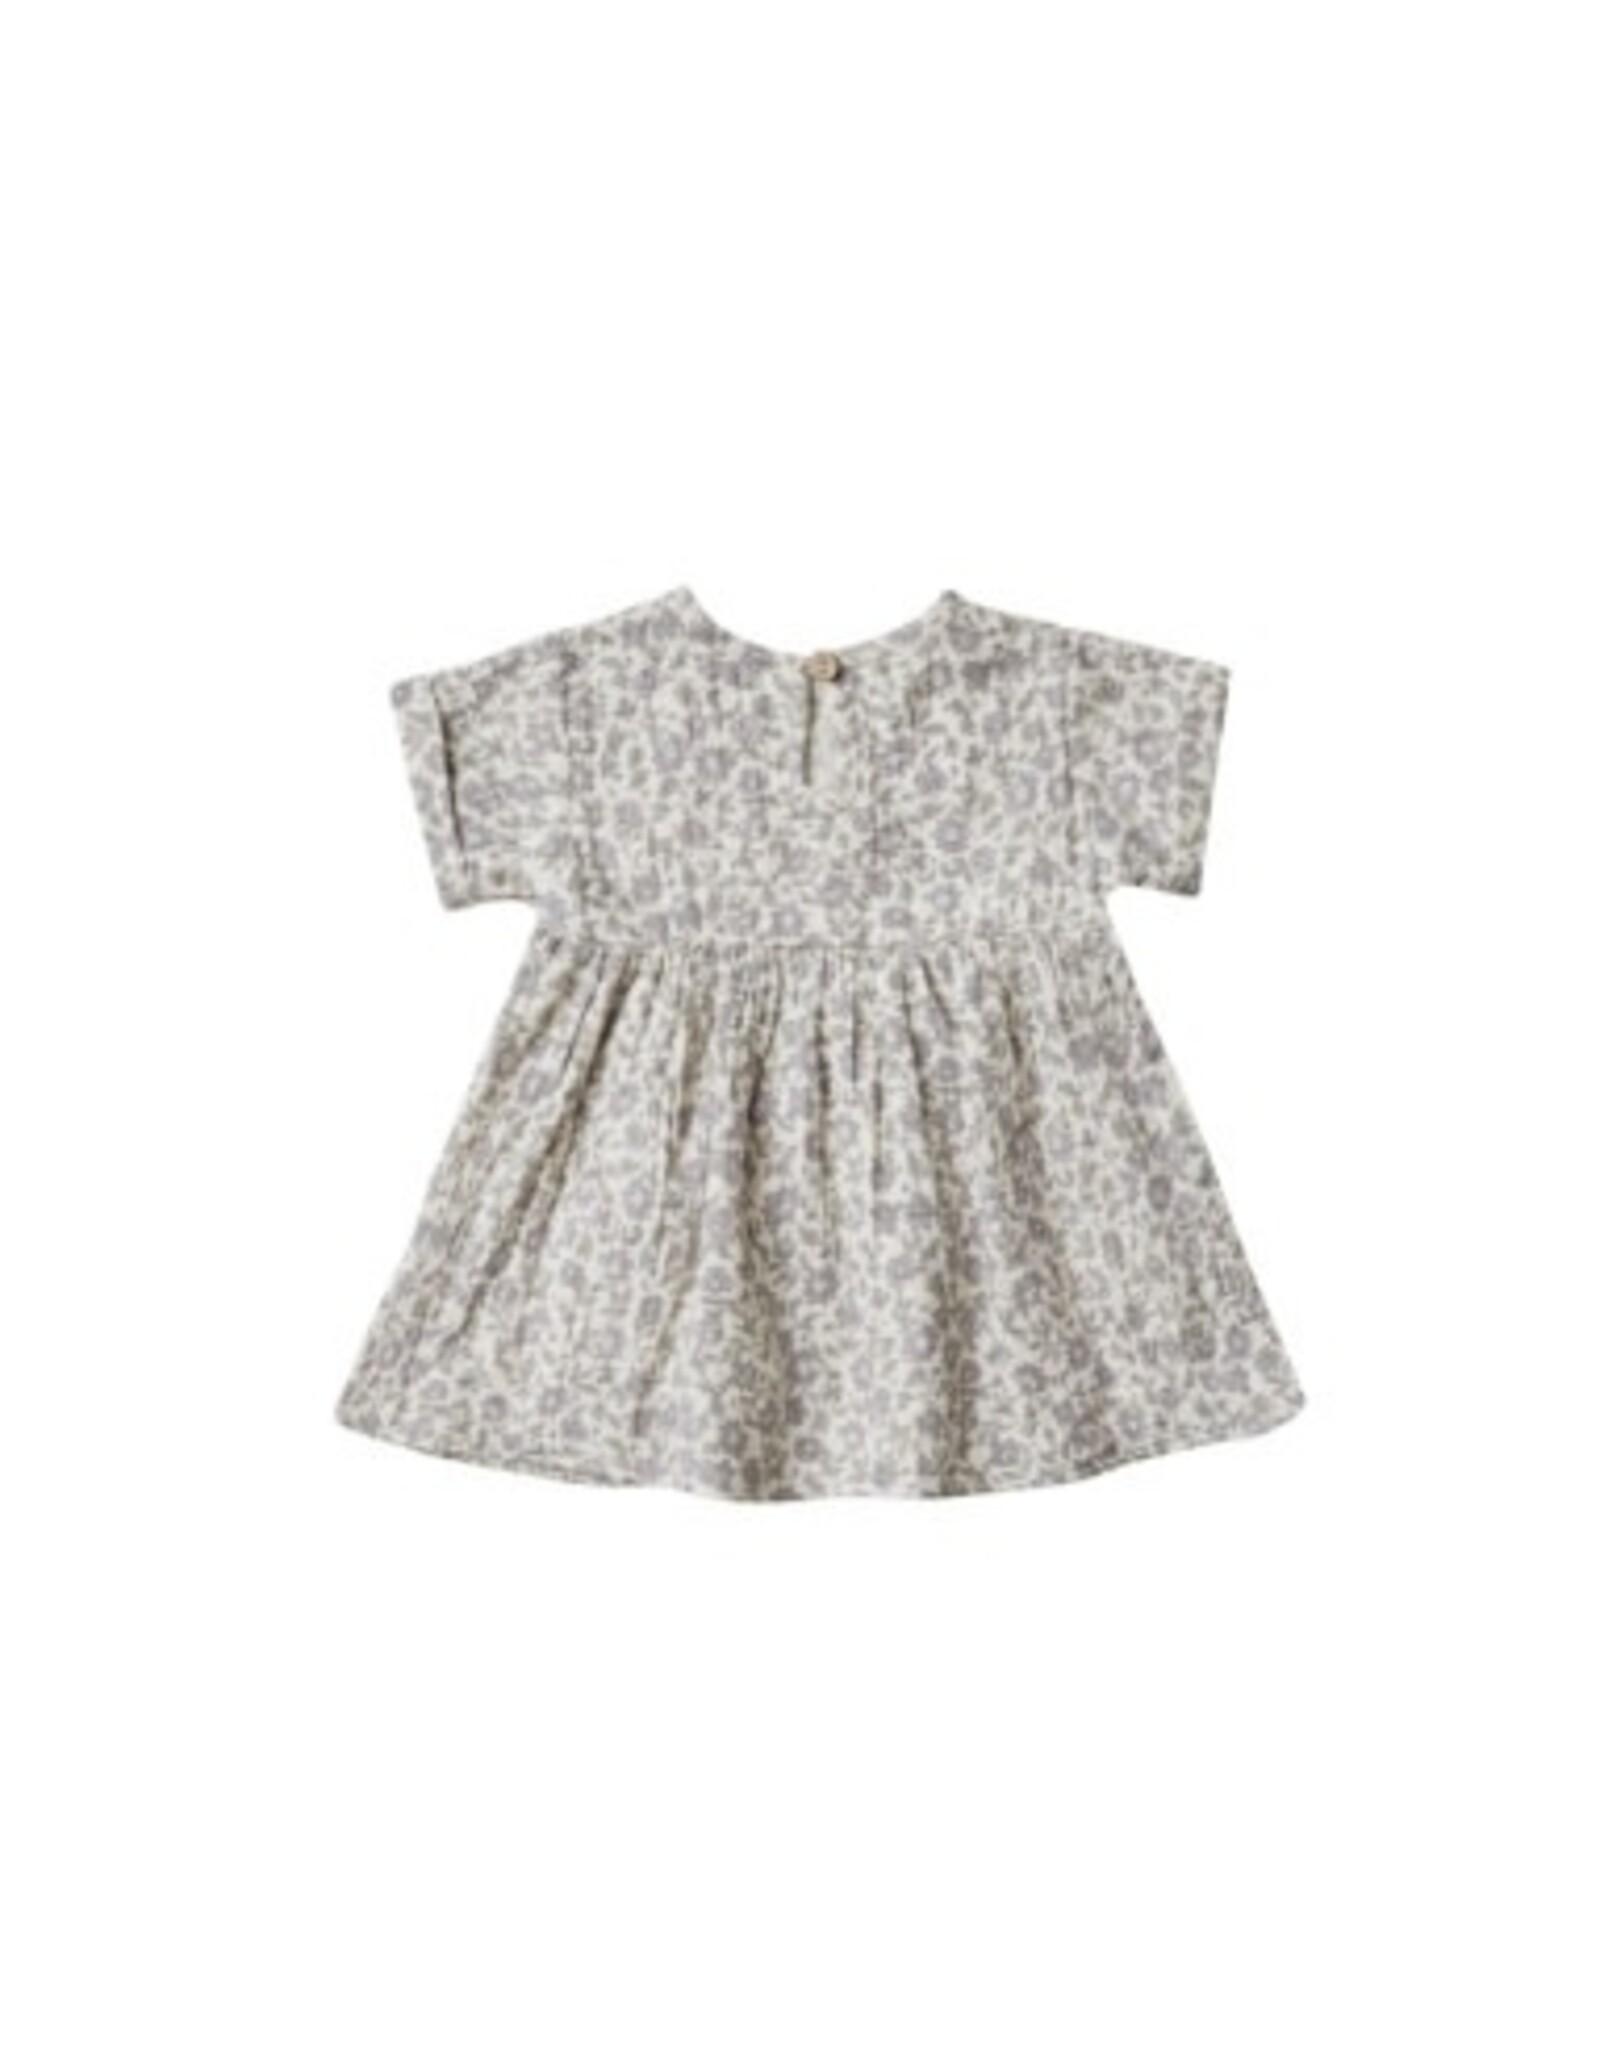 Rylee and Cru BRIELLE DRESS || FRENCH GARDEN